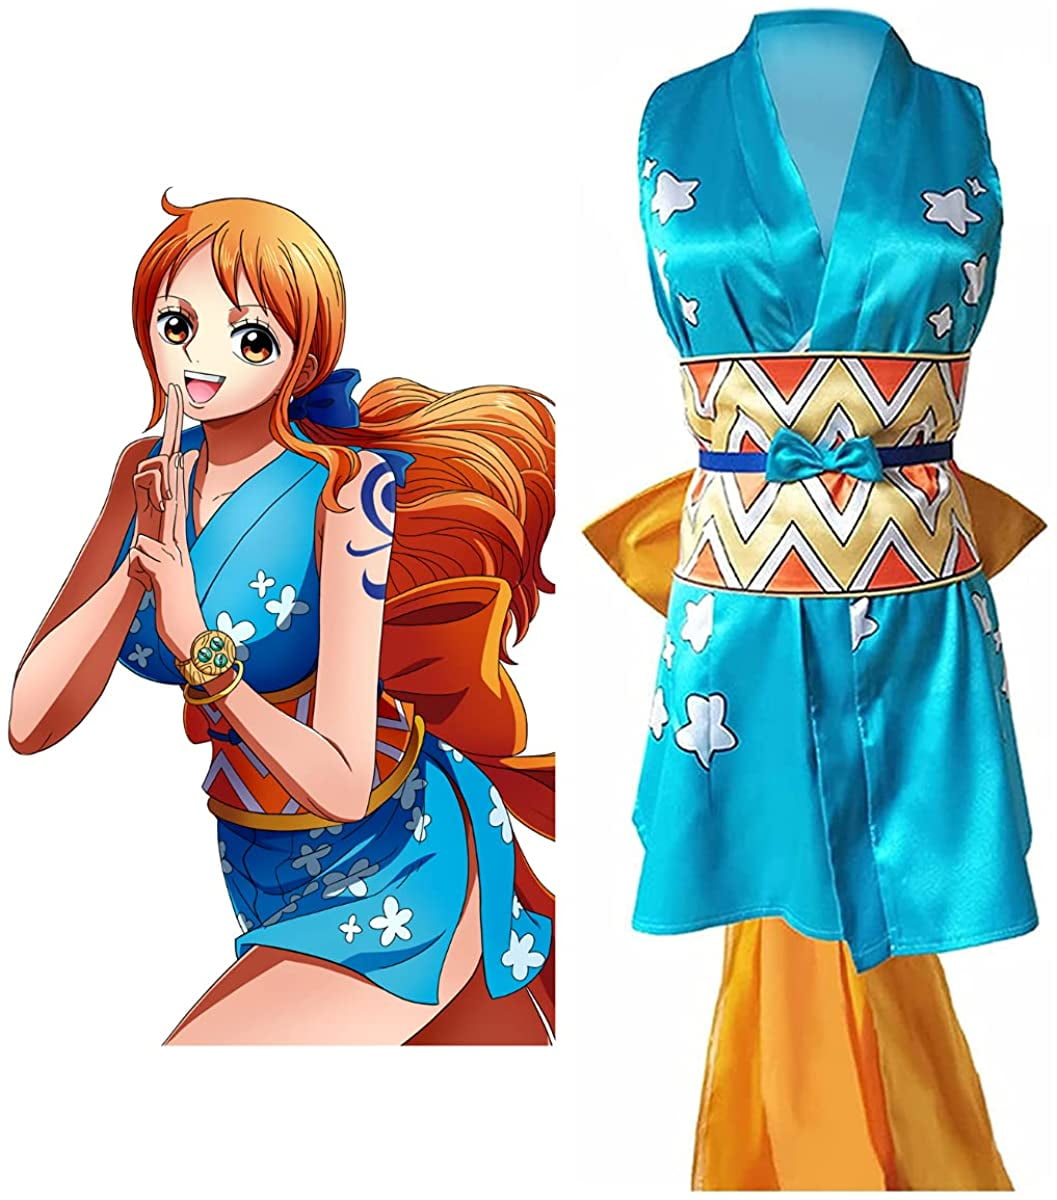 One Piece Film: Red - Nami Cosplay Costumes